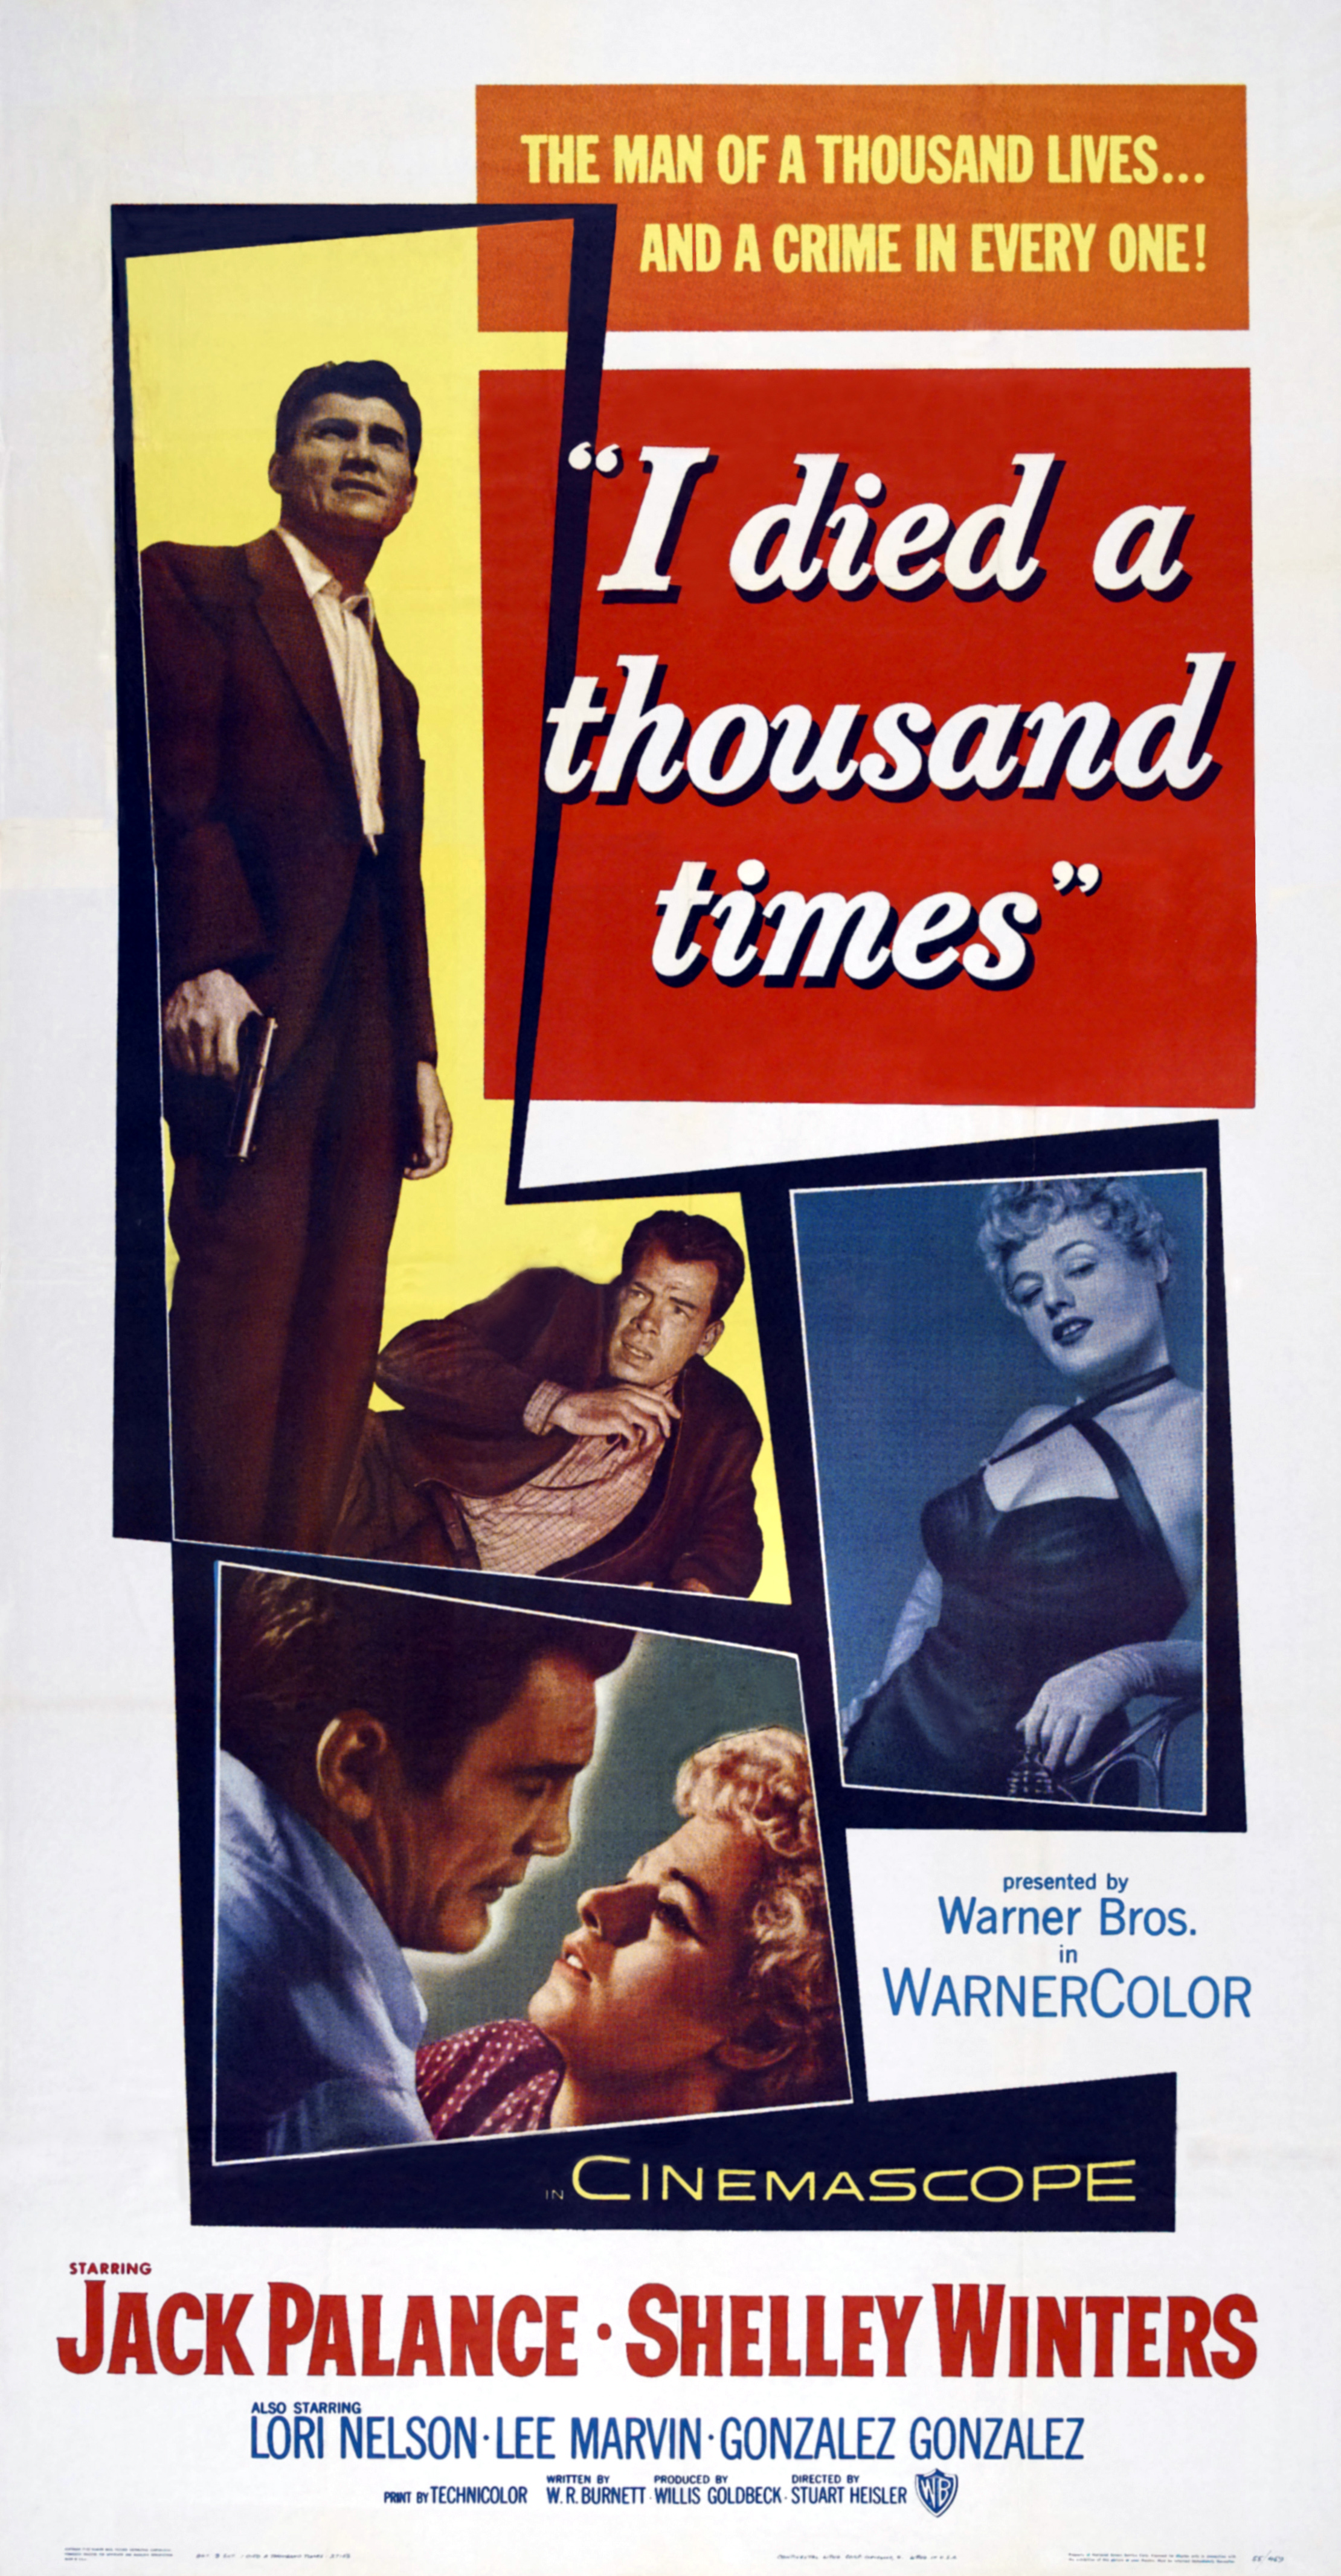 example of film noir poster